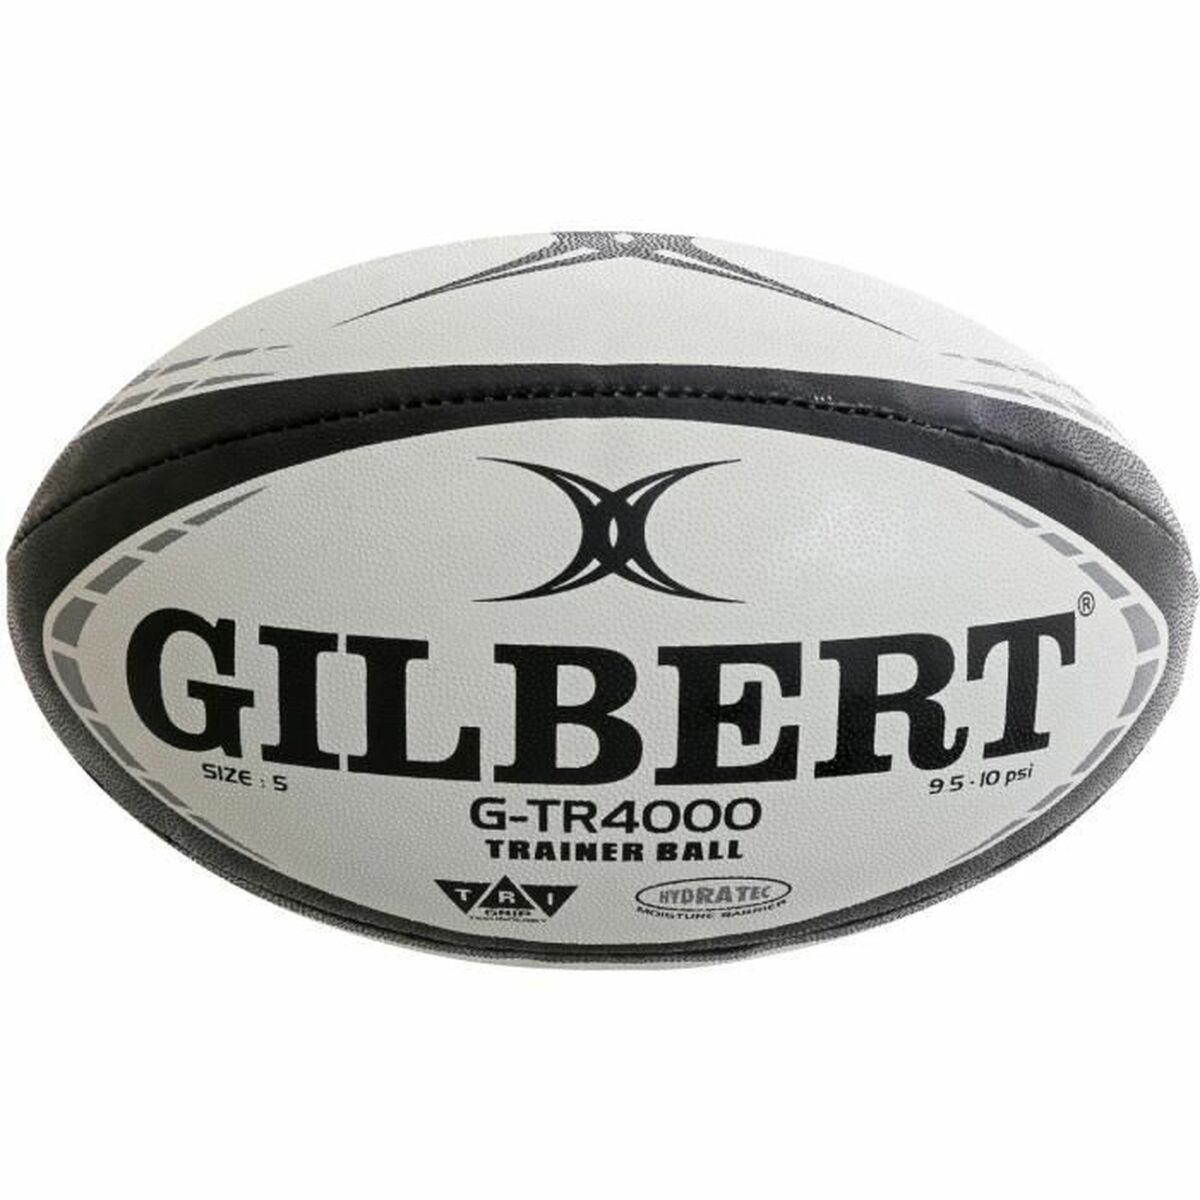 Rugby Ball Gilbert G-TR4000 TRAINER Multicolour Black